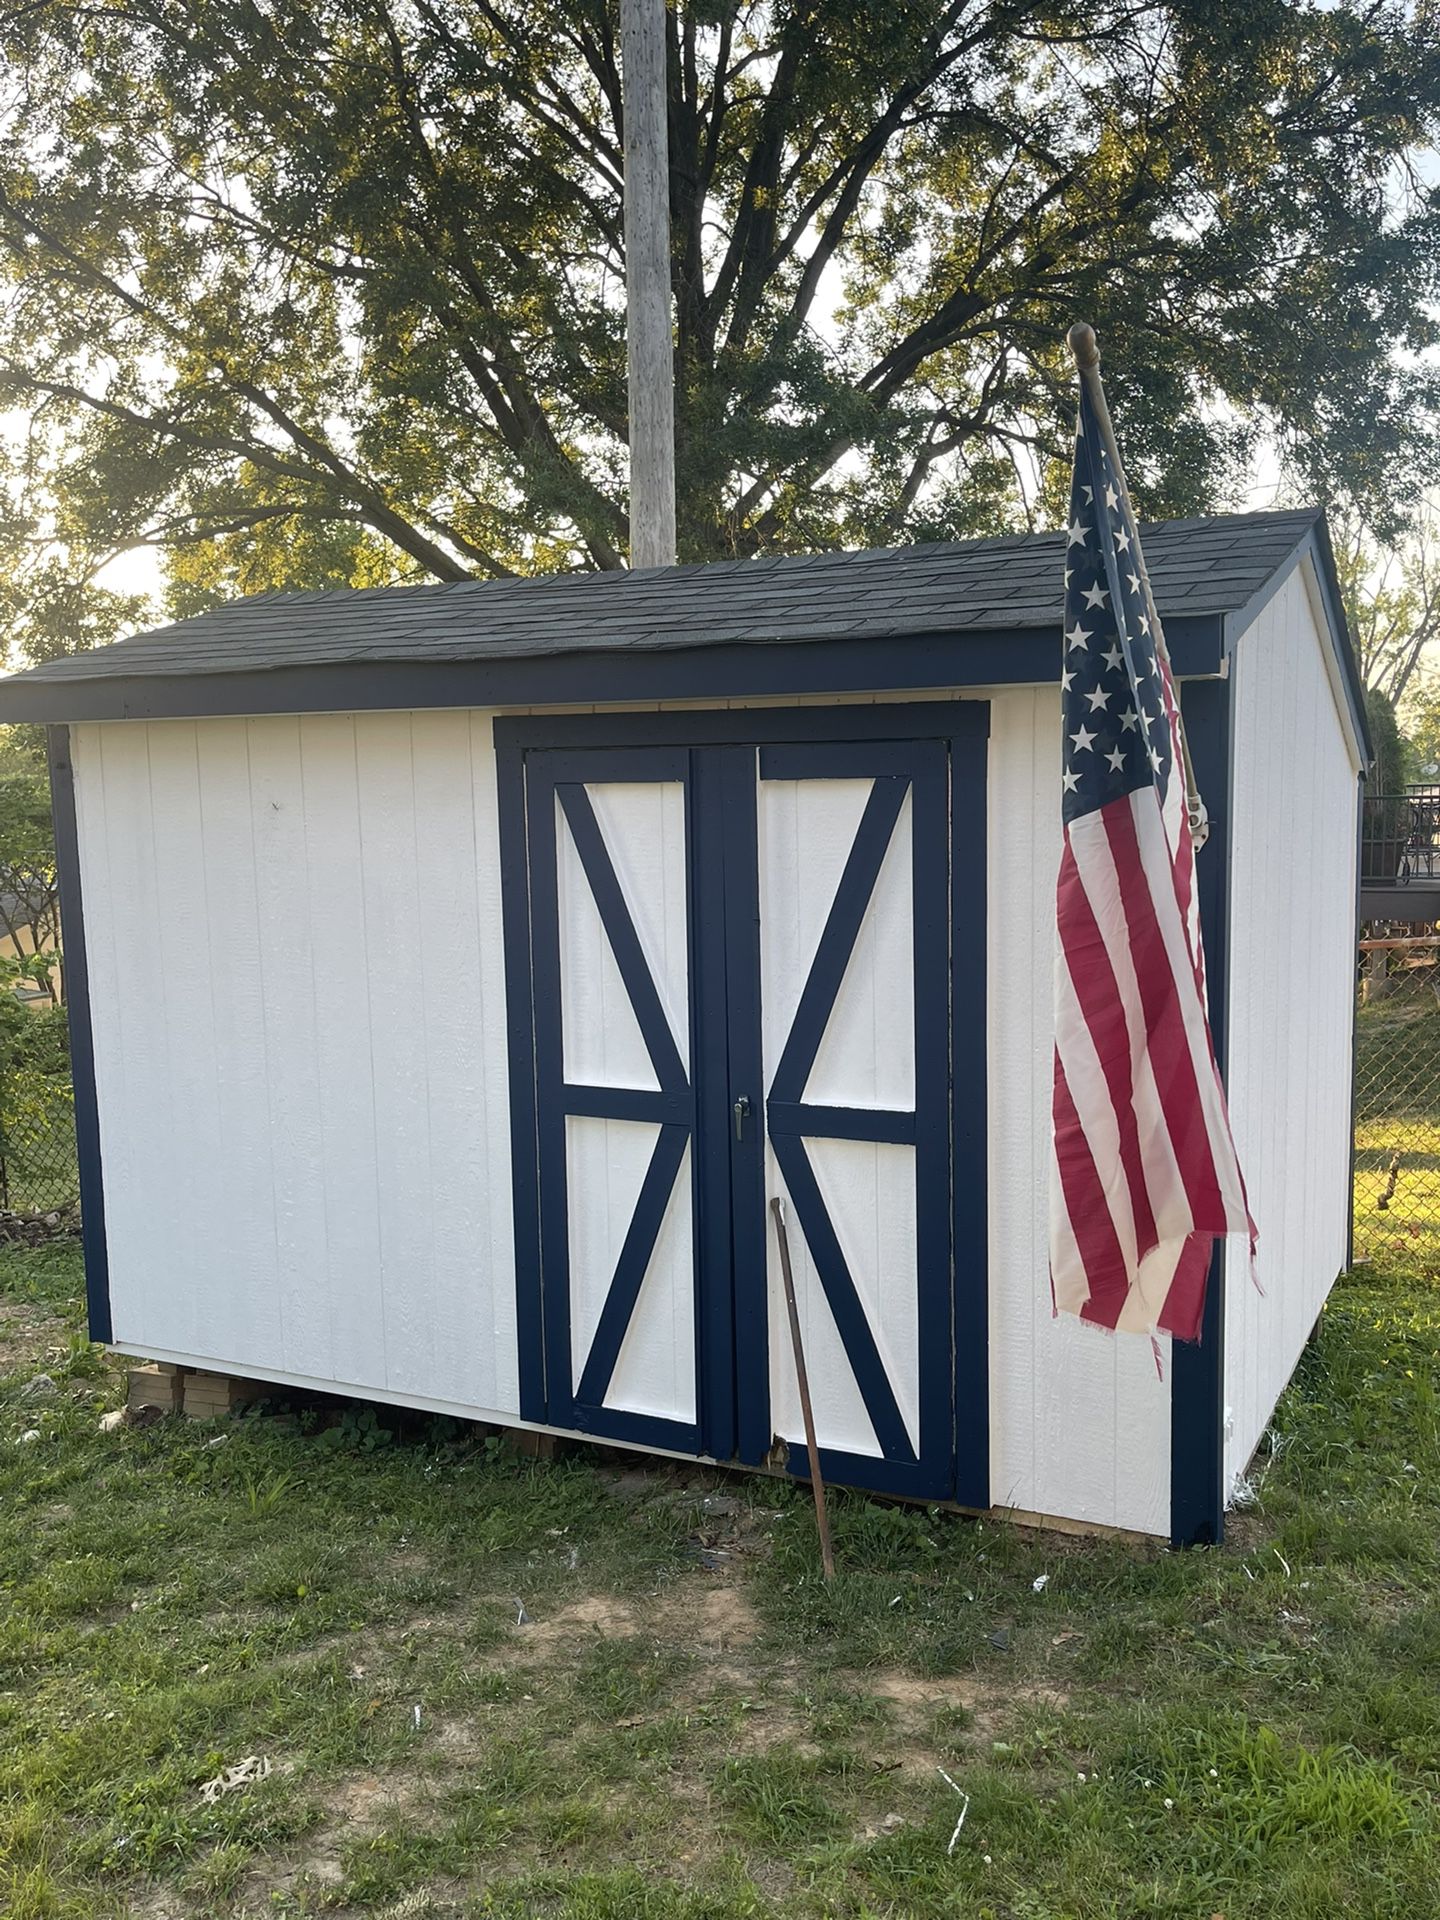 Shed 12x8 ft